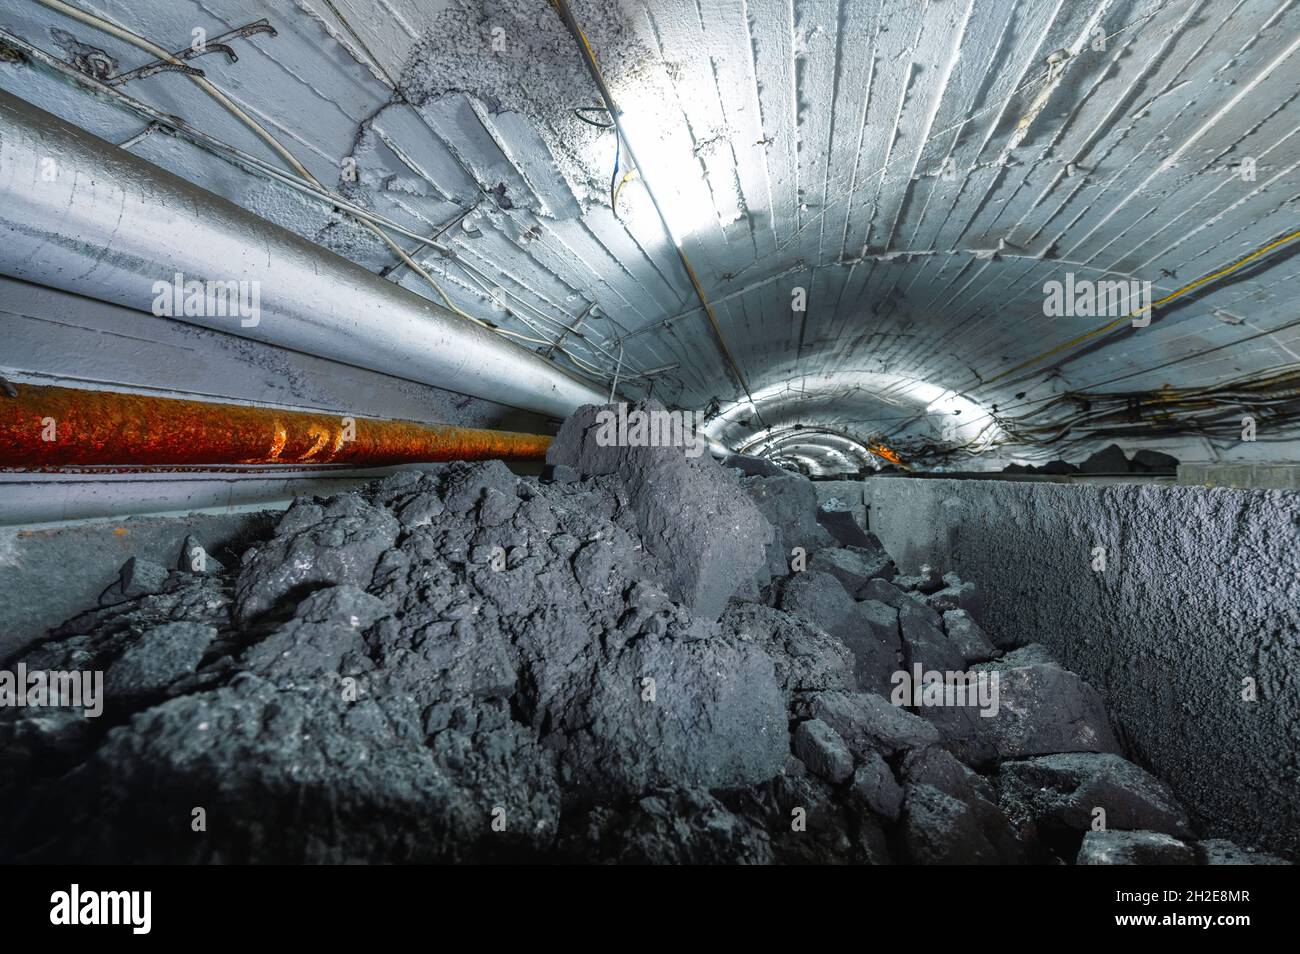 Mine cart filled with ore and stones Stock Photo